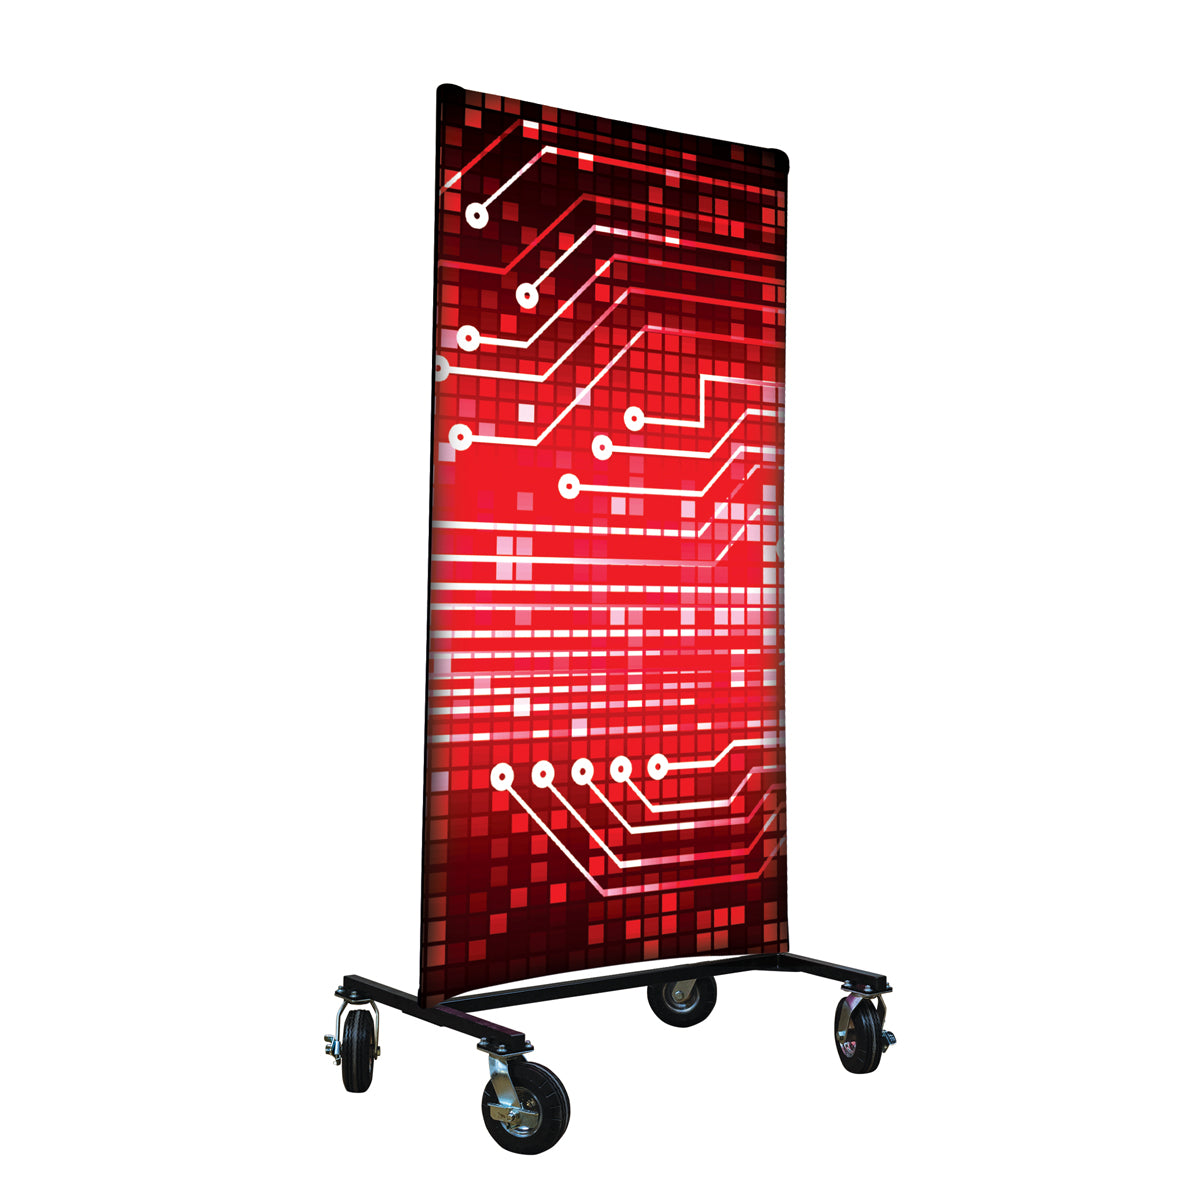 Red Circuitboard I-Frame Backdrop